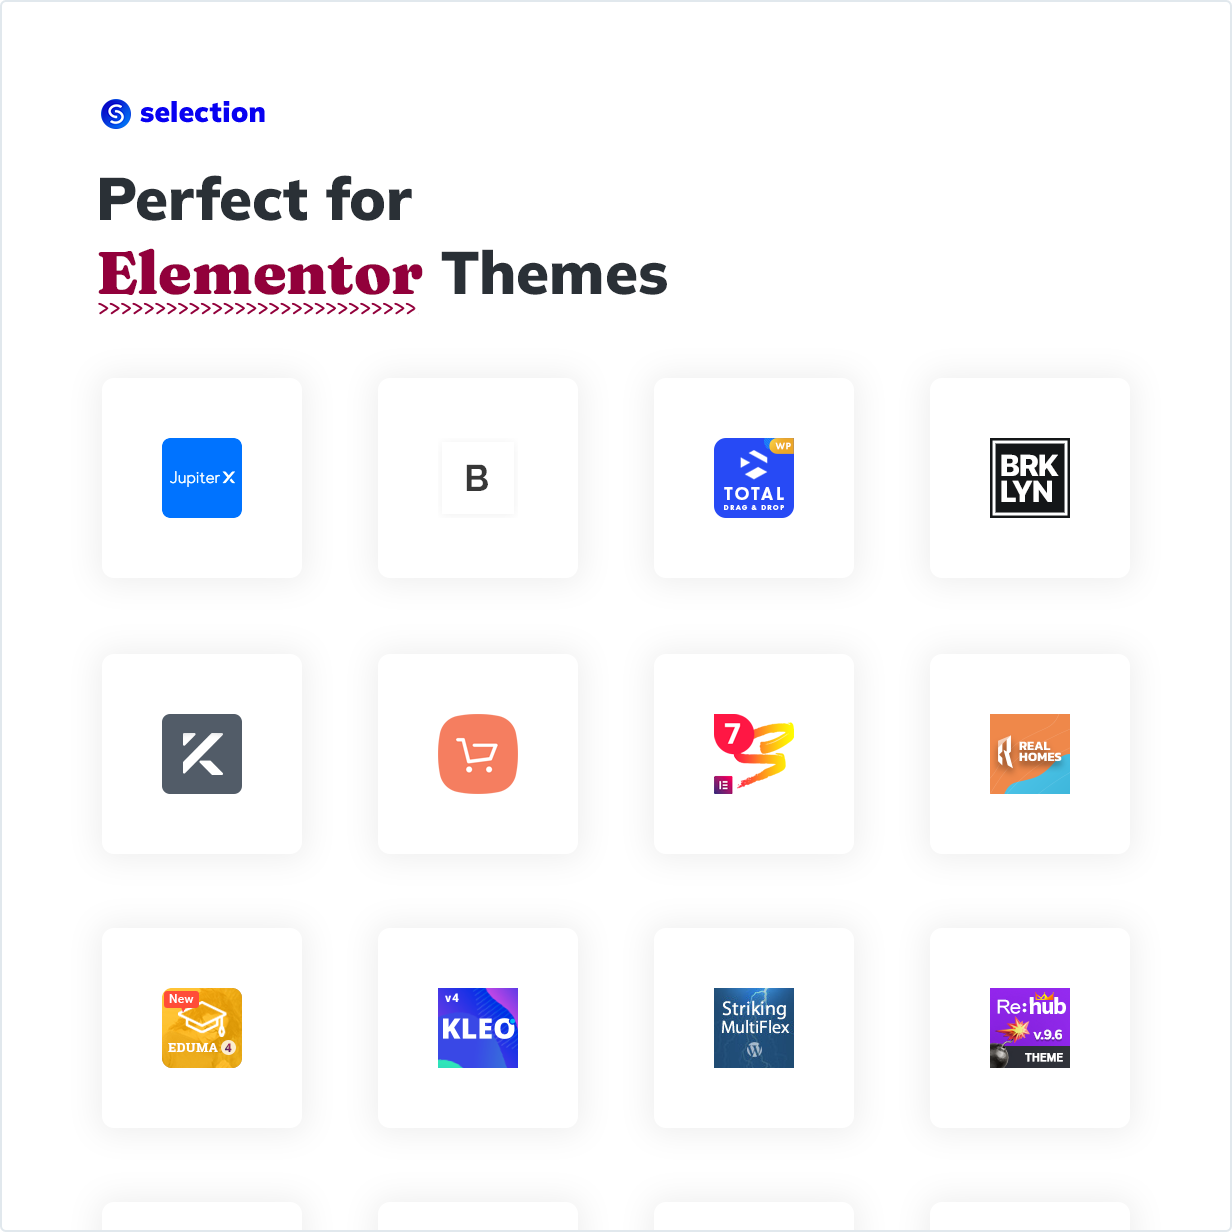 Perfect for Elementor Themes